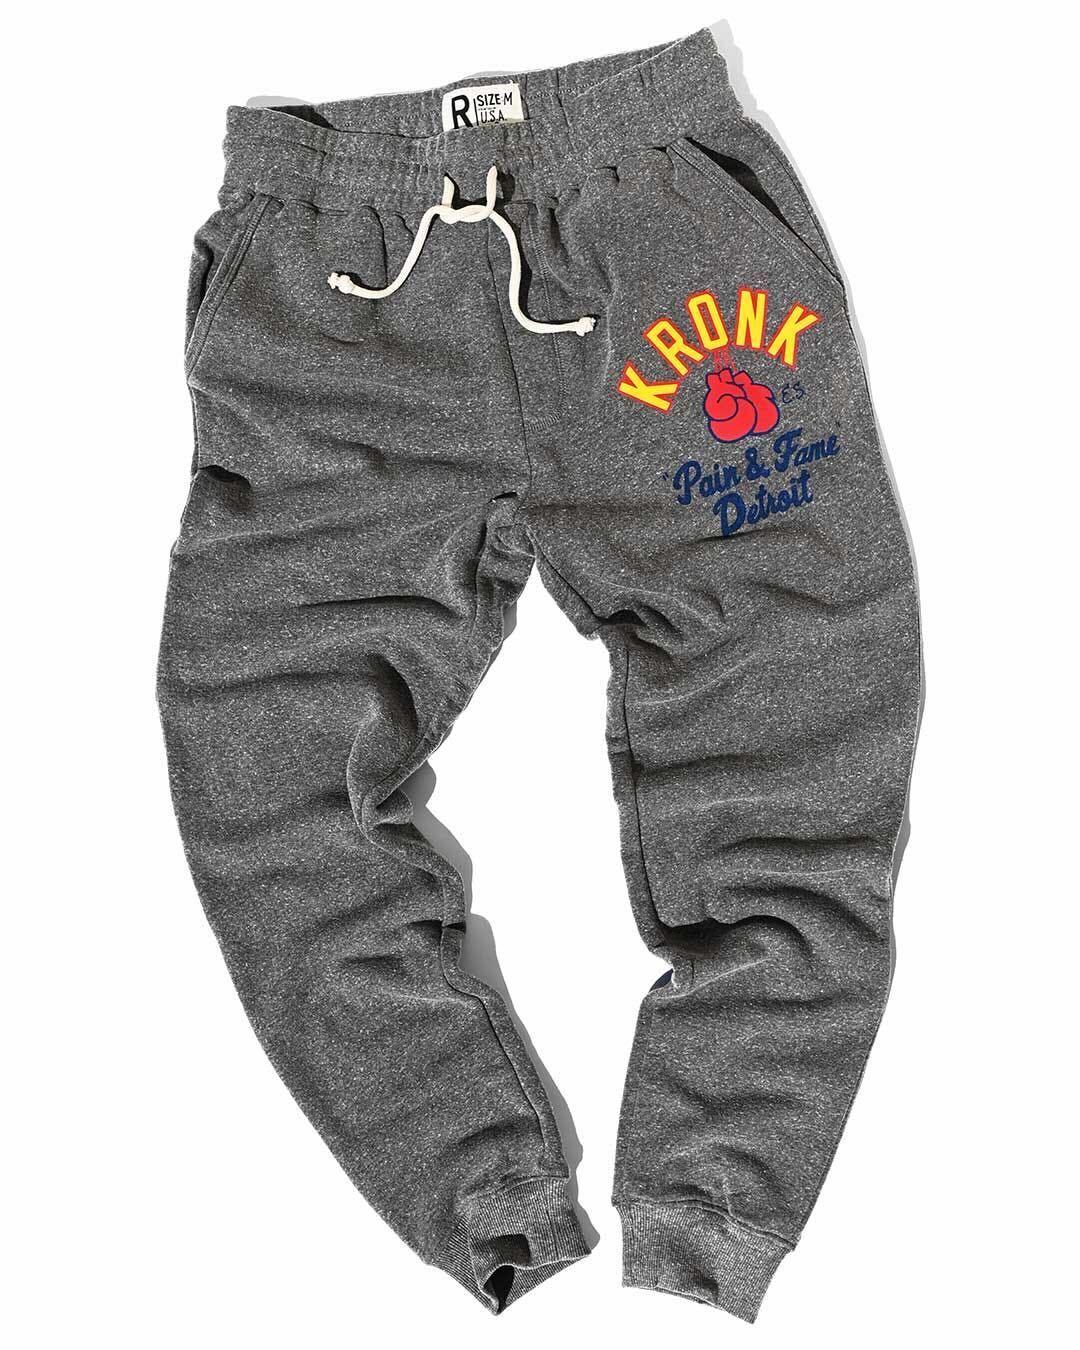 Kronk Gym Classic Grey Sweatpants - Roots of Fight Canada